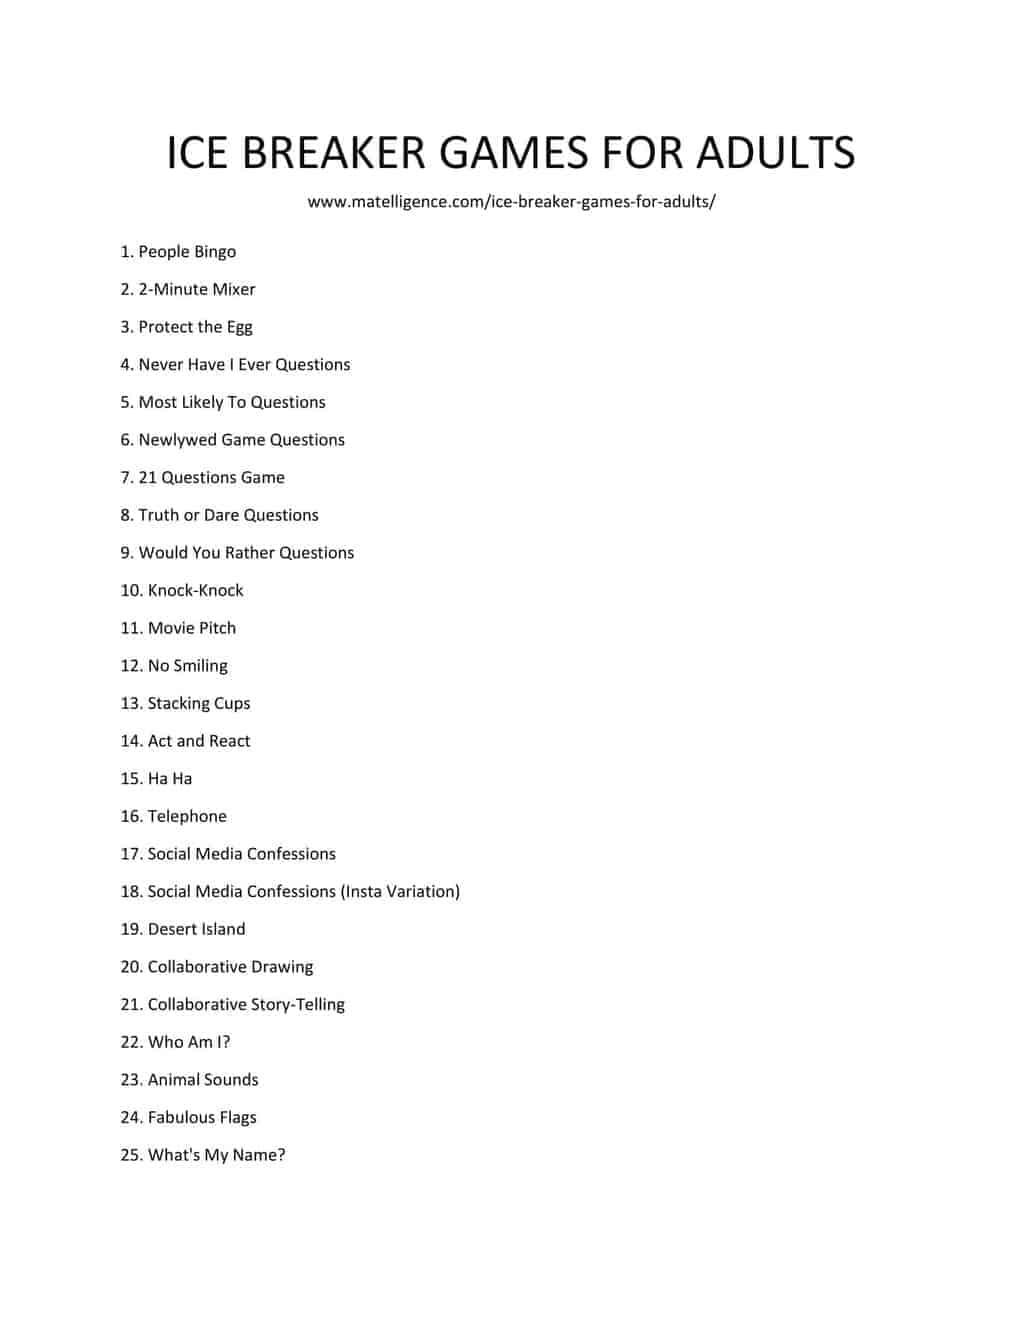 list of ICE BREAKER GAMES FOR ADULTS 1[1]